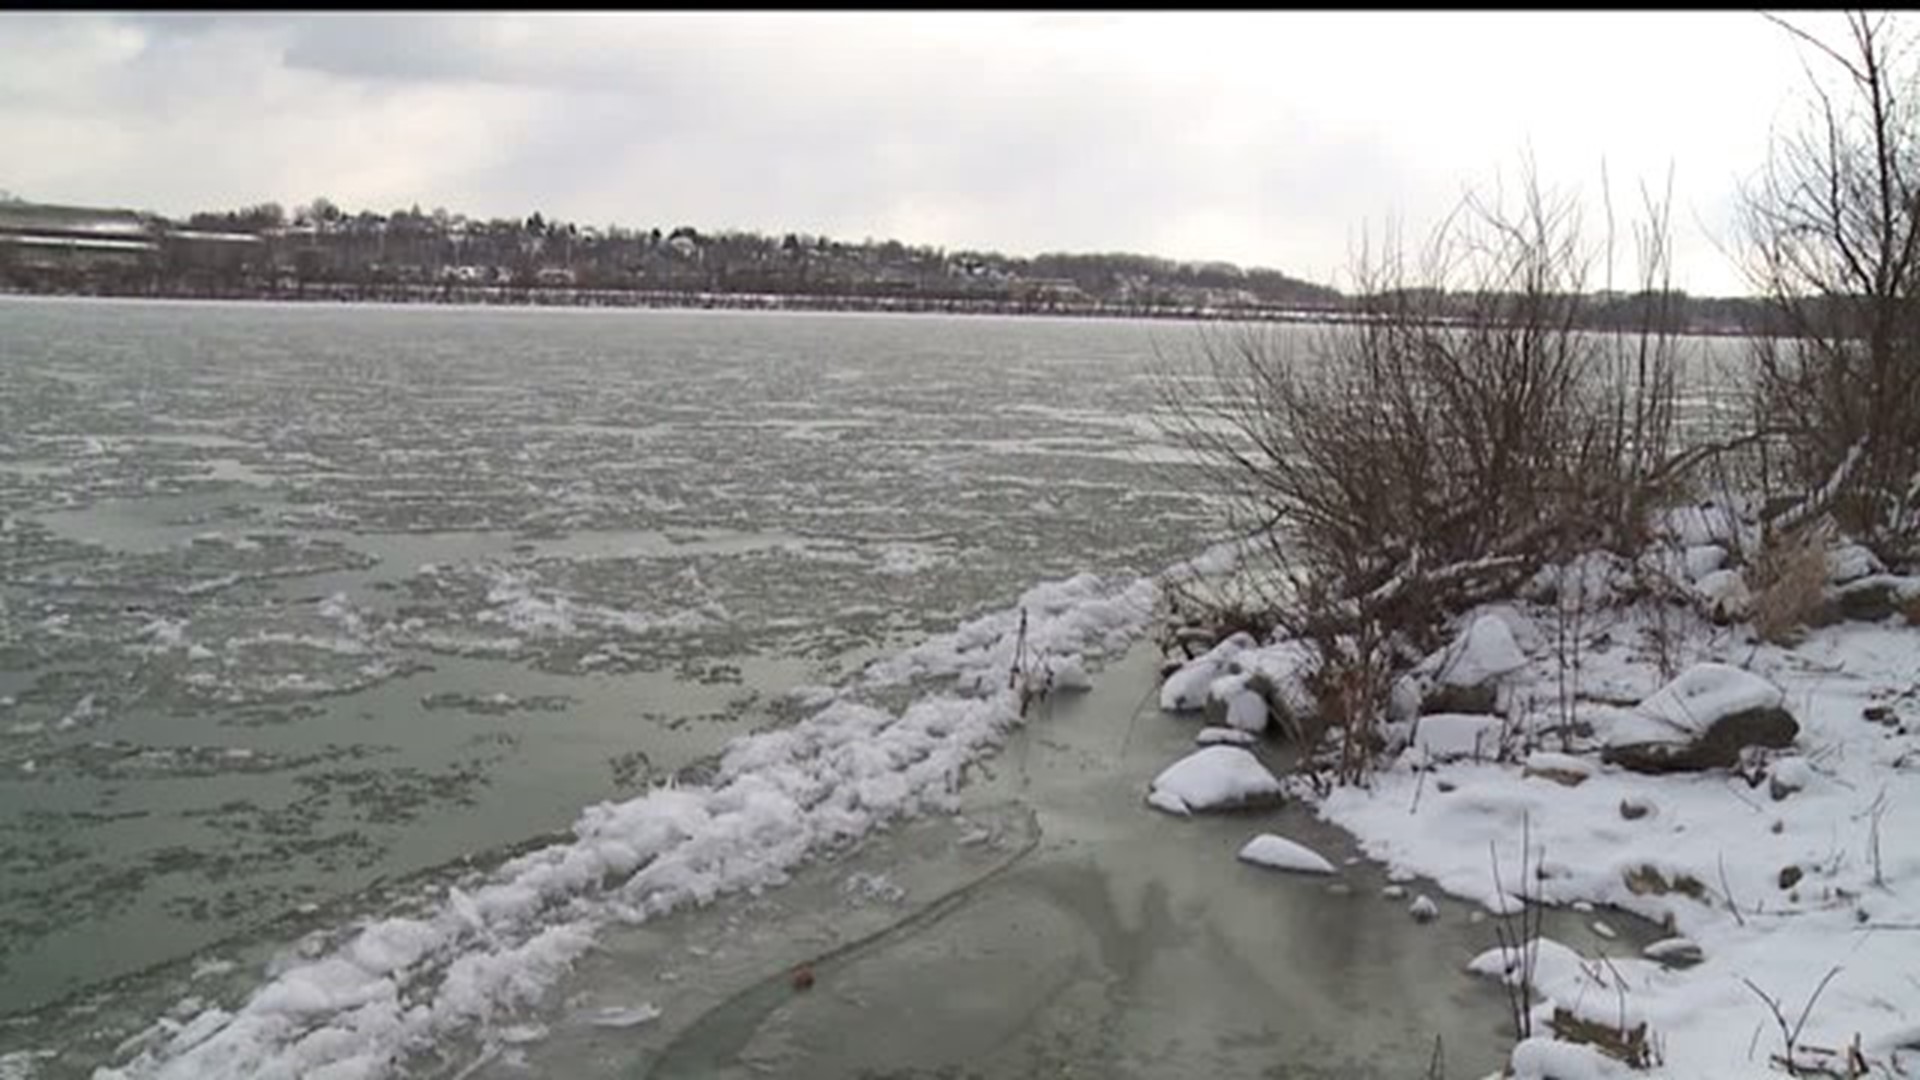 Ice on the river makes search for Medard Kowalski difficult